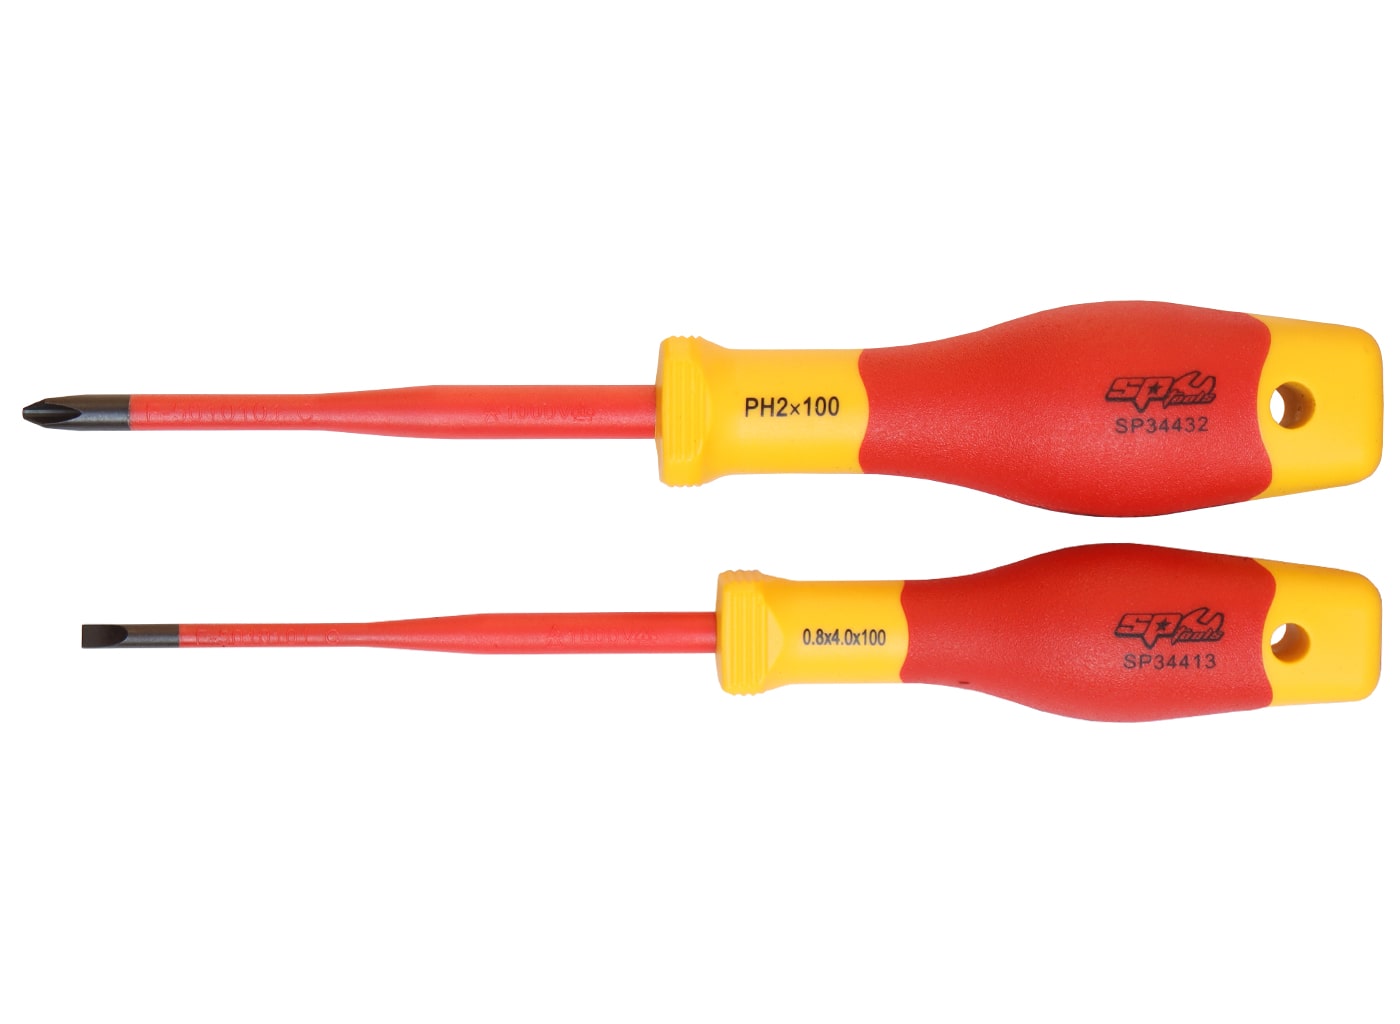 VDE Insulated Electrical Screwdriver Set 2Pce - SP34043 by SP Tools